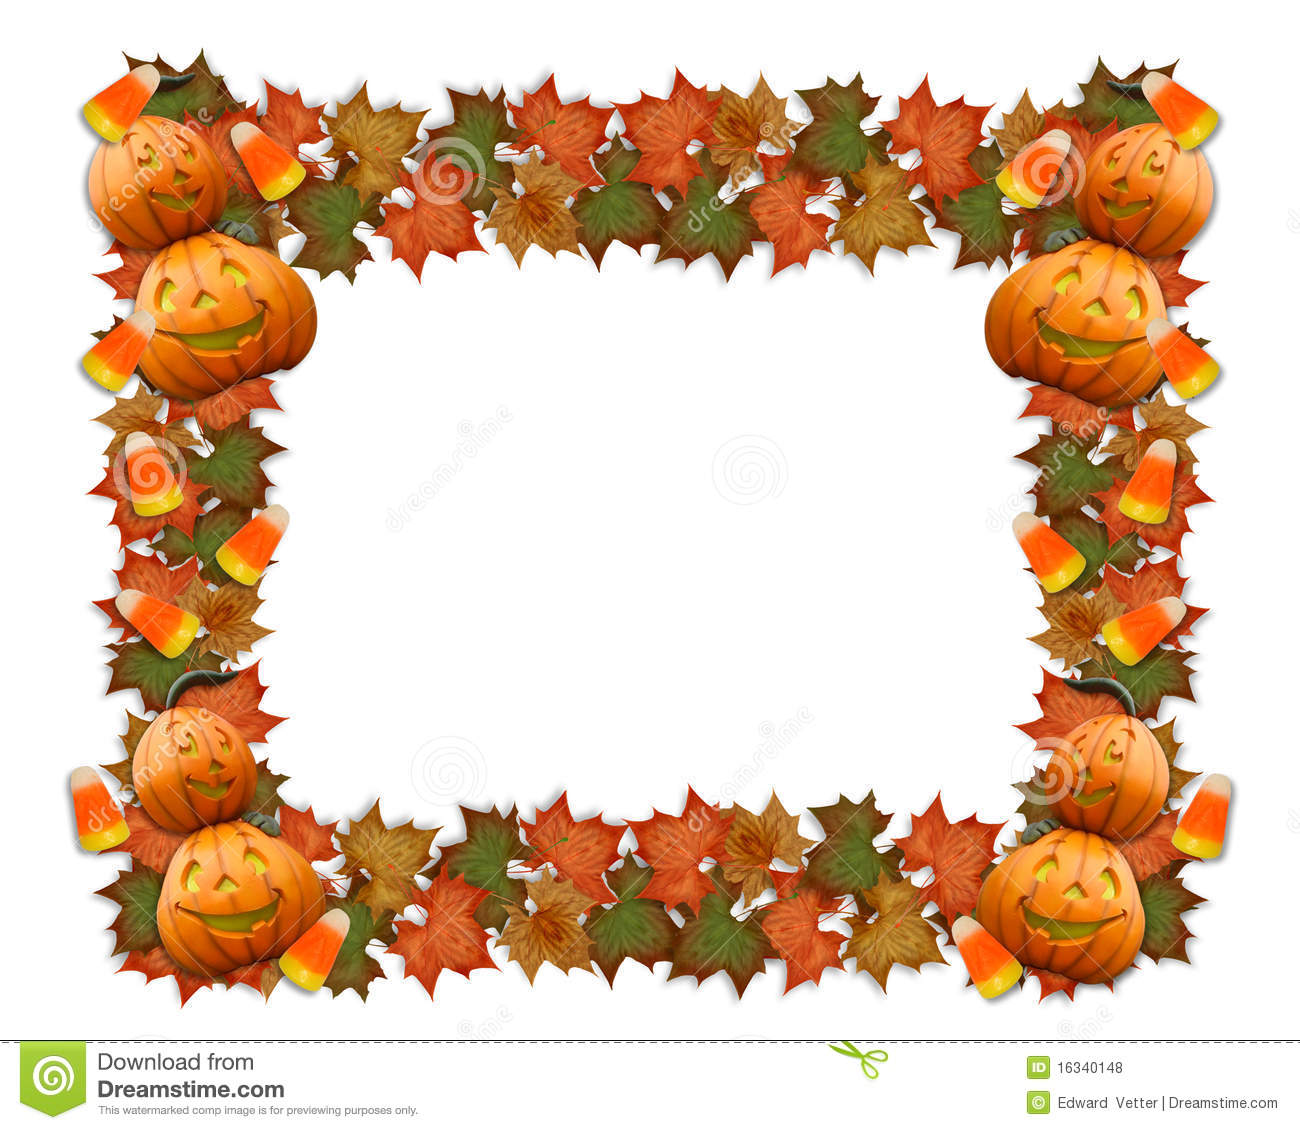 halloween-thank-you-clipart-clipground